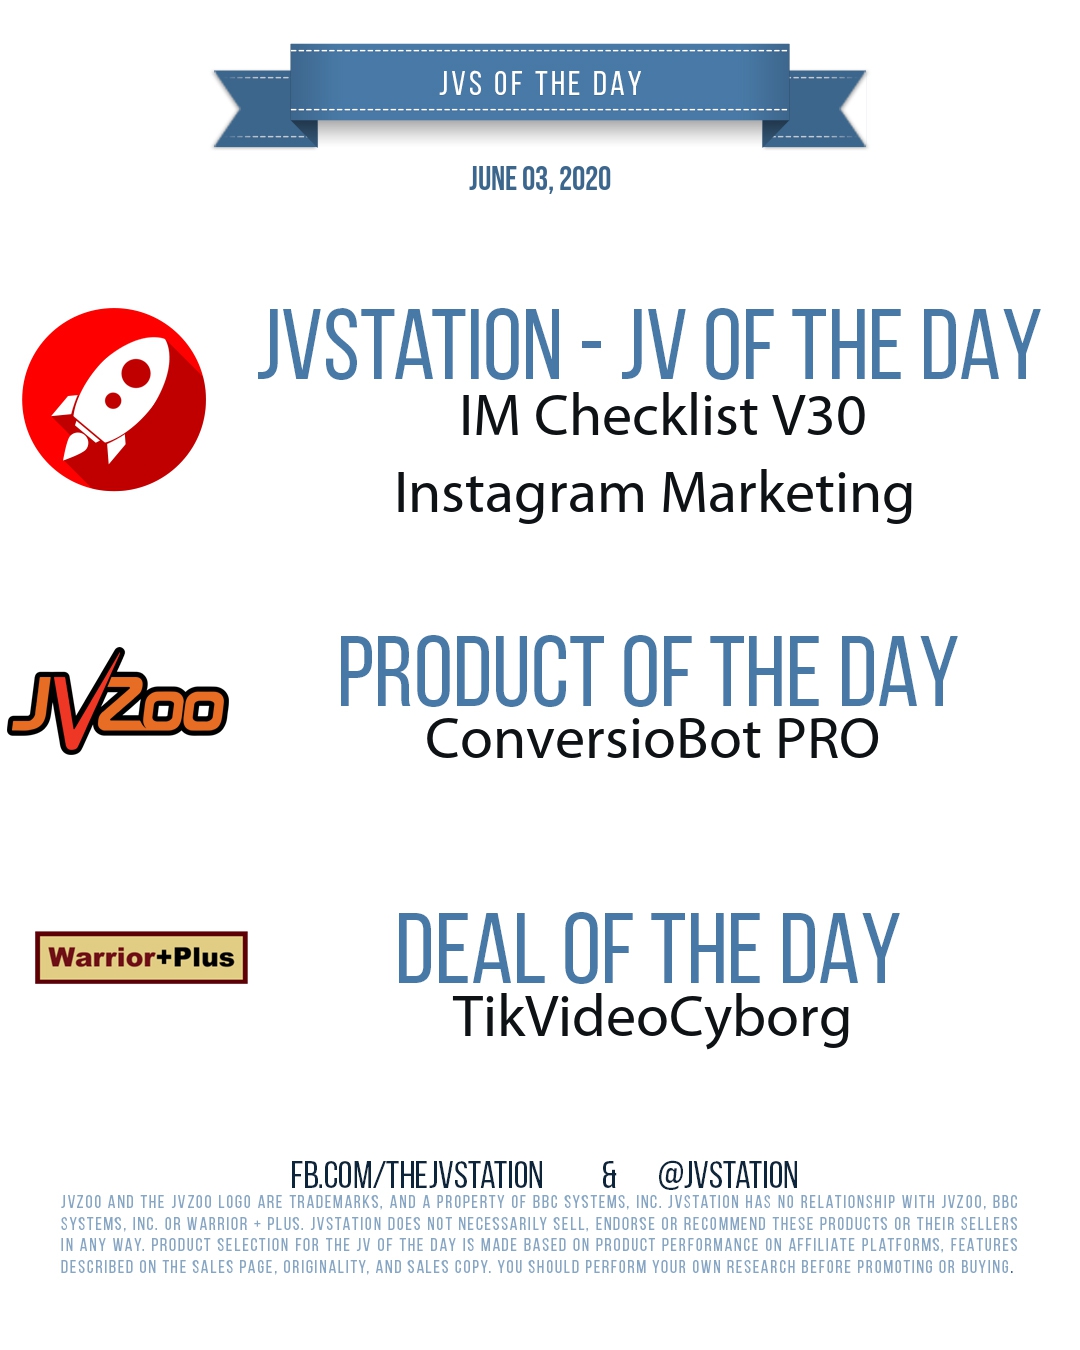 JVs of the day - June 03, 2020